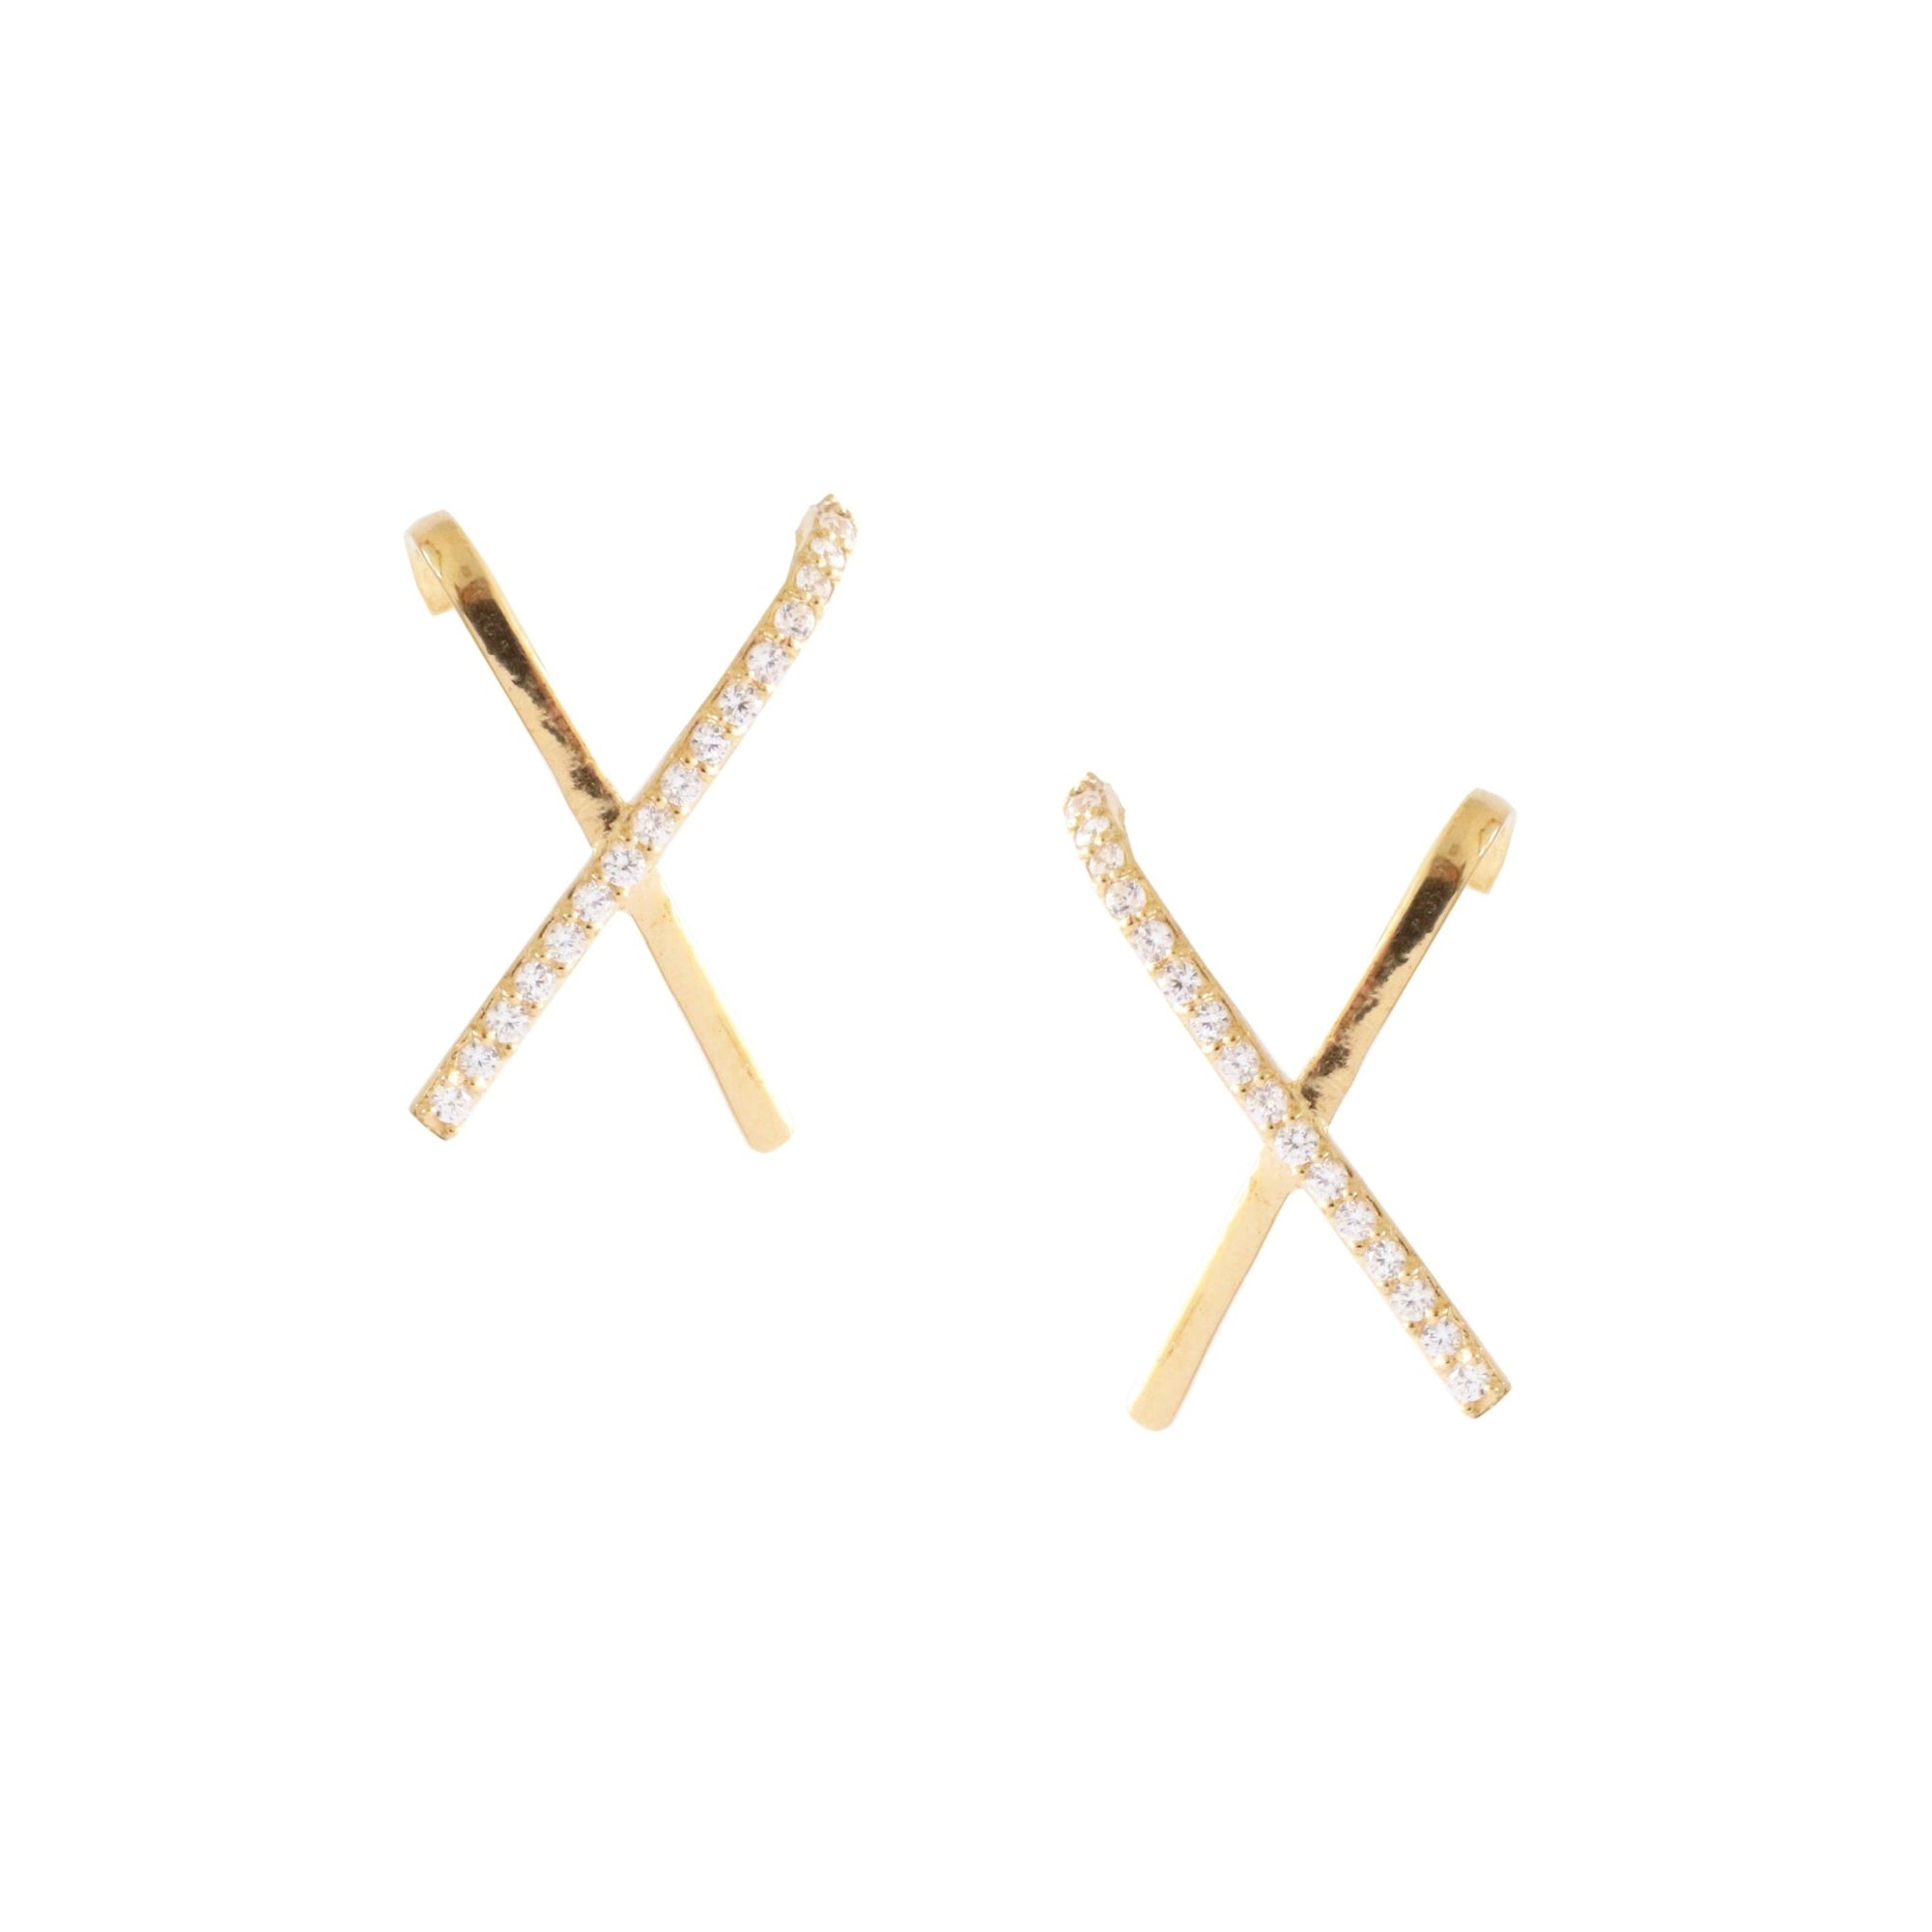 STAR CROSSED LOVE BAR EARRINGS - CUBIC ZIRCONIA & GOLD - SO PRETTY CARA COTTER